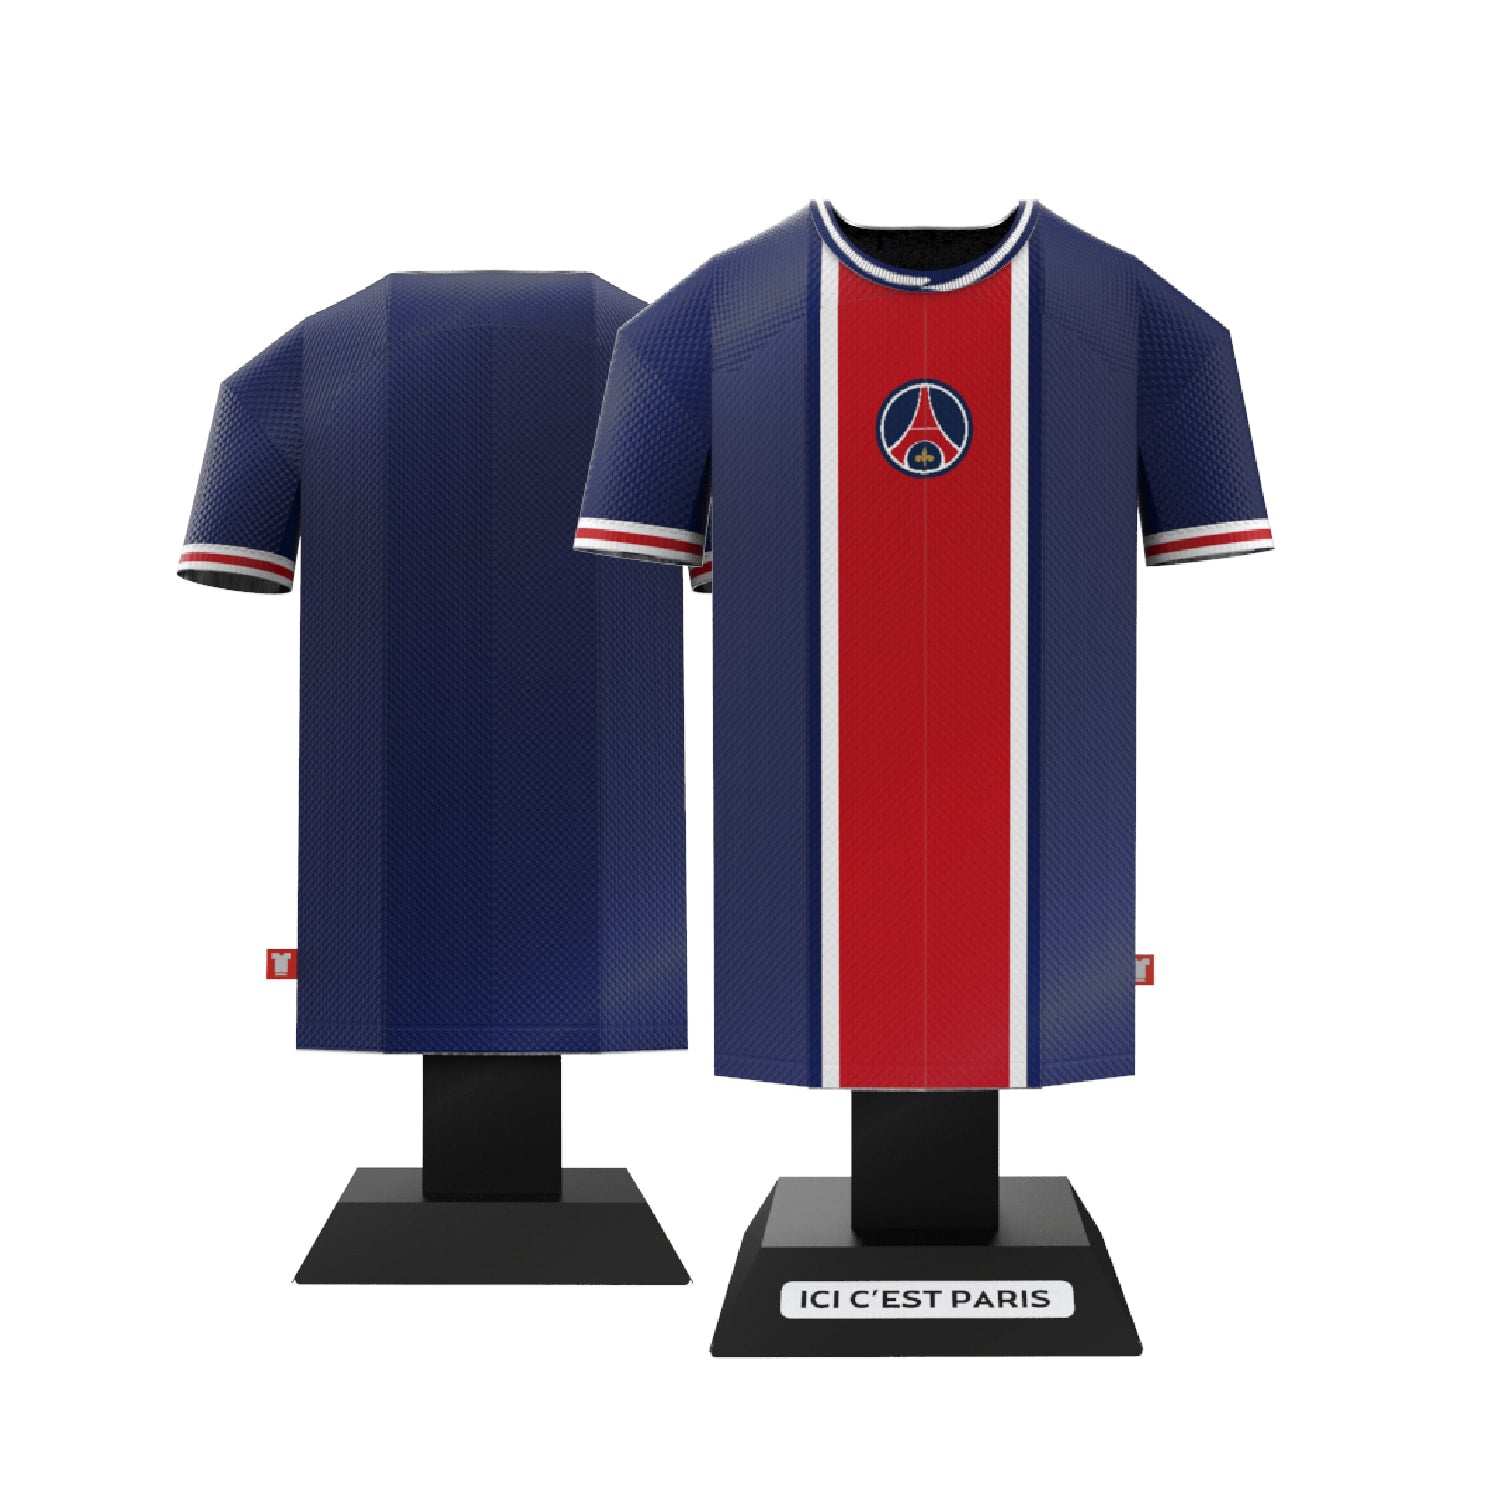 PSG-Retro-Jersey-Kit-front-and-back-view